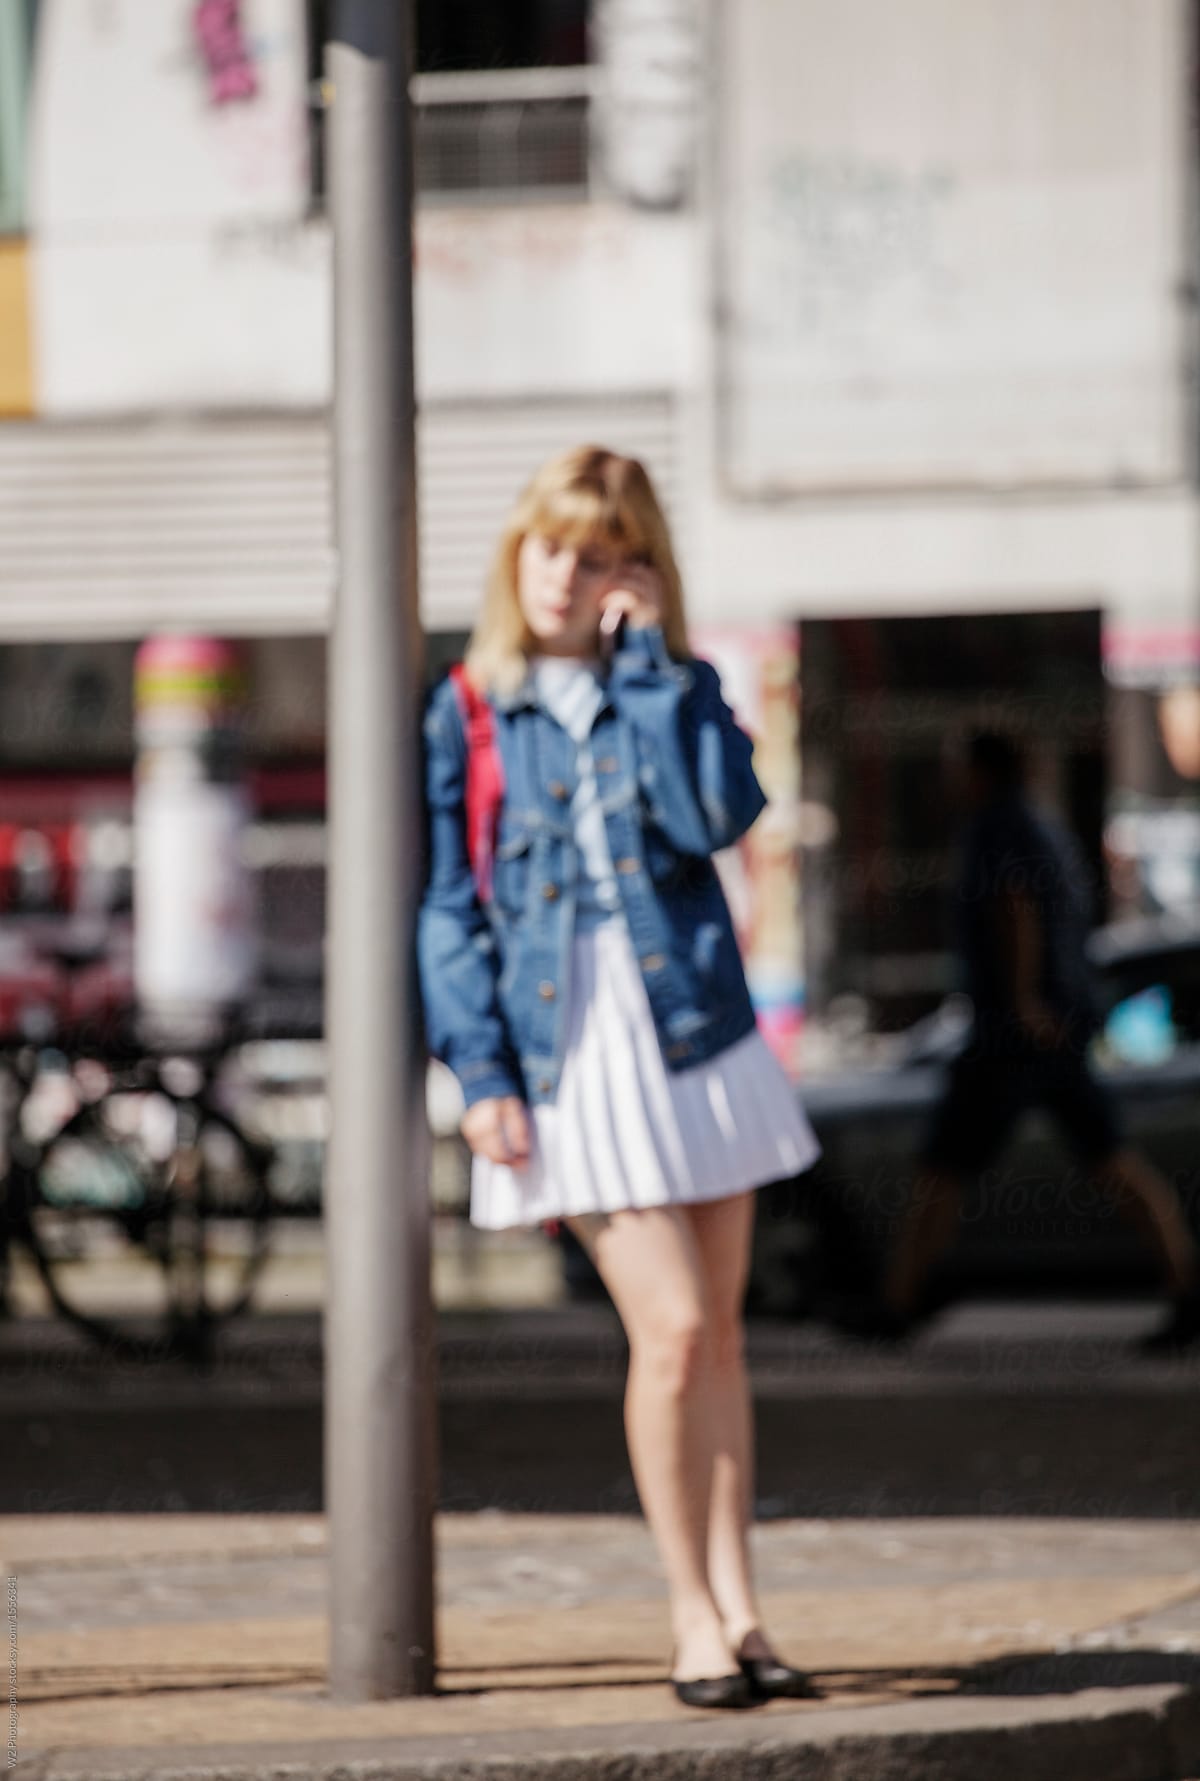 Out of focus image of a woman using her phone and leaning on a lamp post.